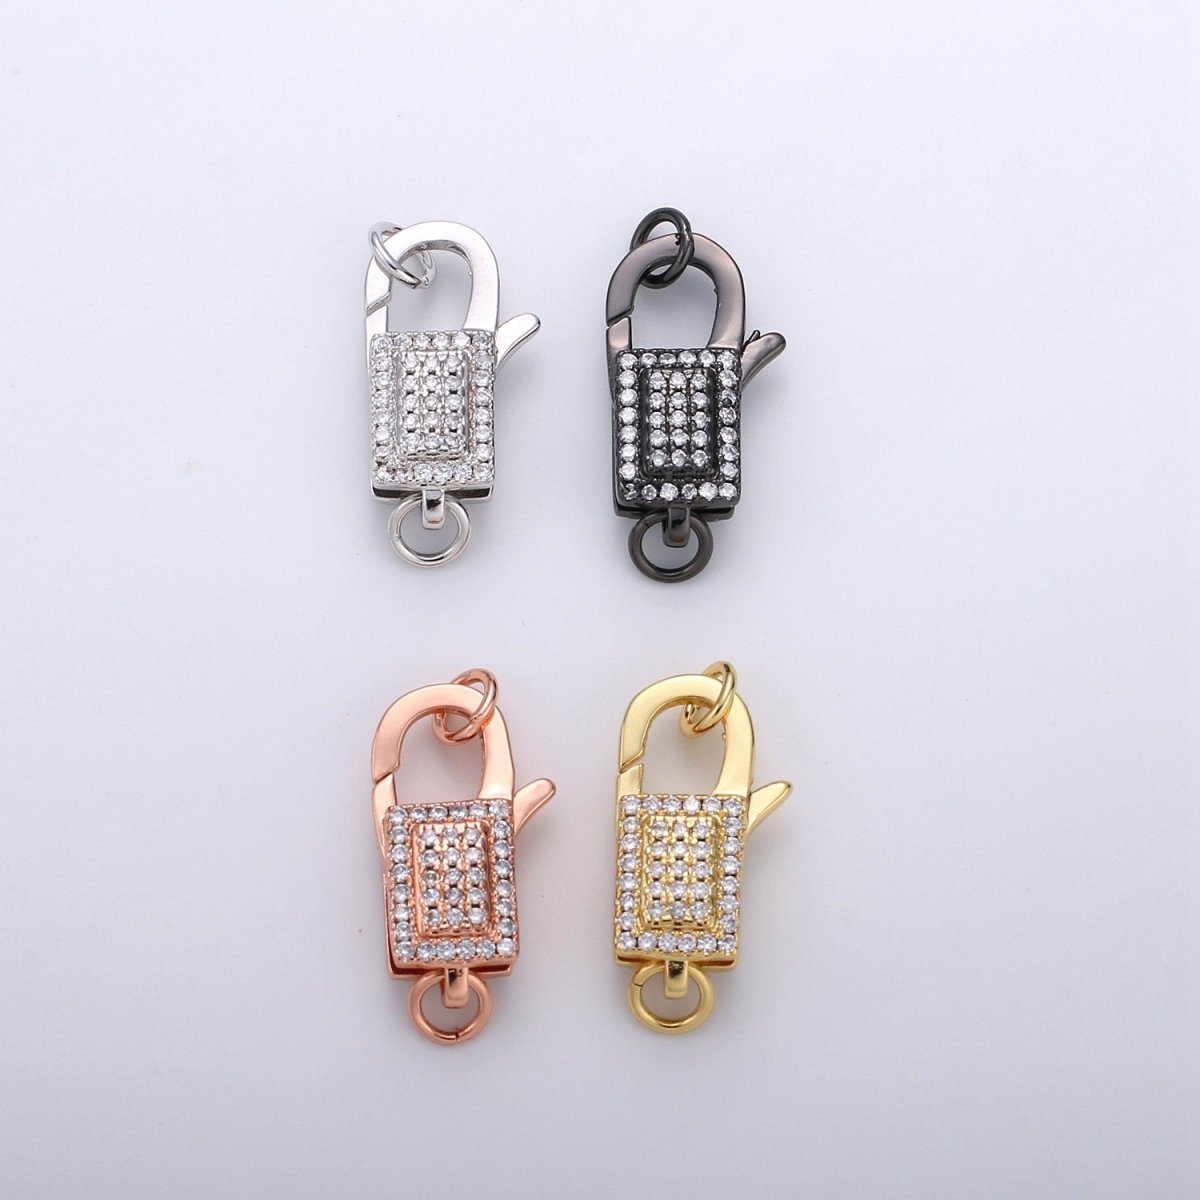 Pave Lobster Clasp, Micro Pave CZ Lobster Clasp, CZ Enhancer Clasp,Pave Bail Clasp,Large Pendant Pave Clasp, Gold Silver Pave Clasp, 20x10mm K-611 - K-614 - DLUXCA